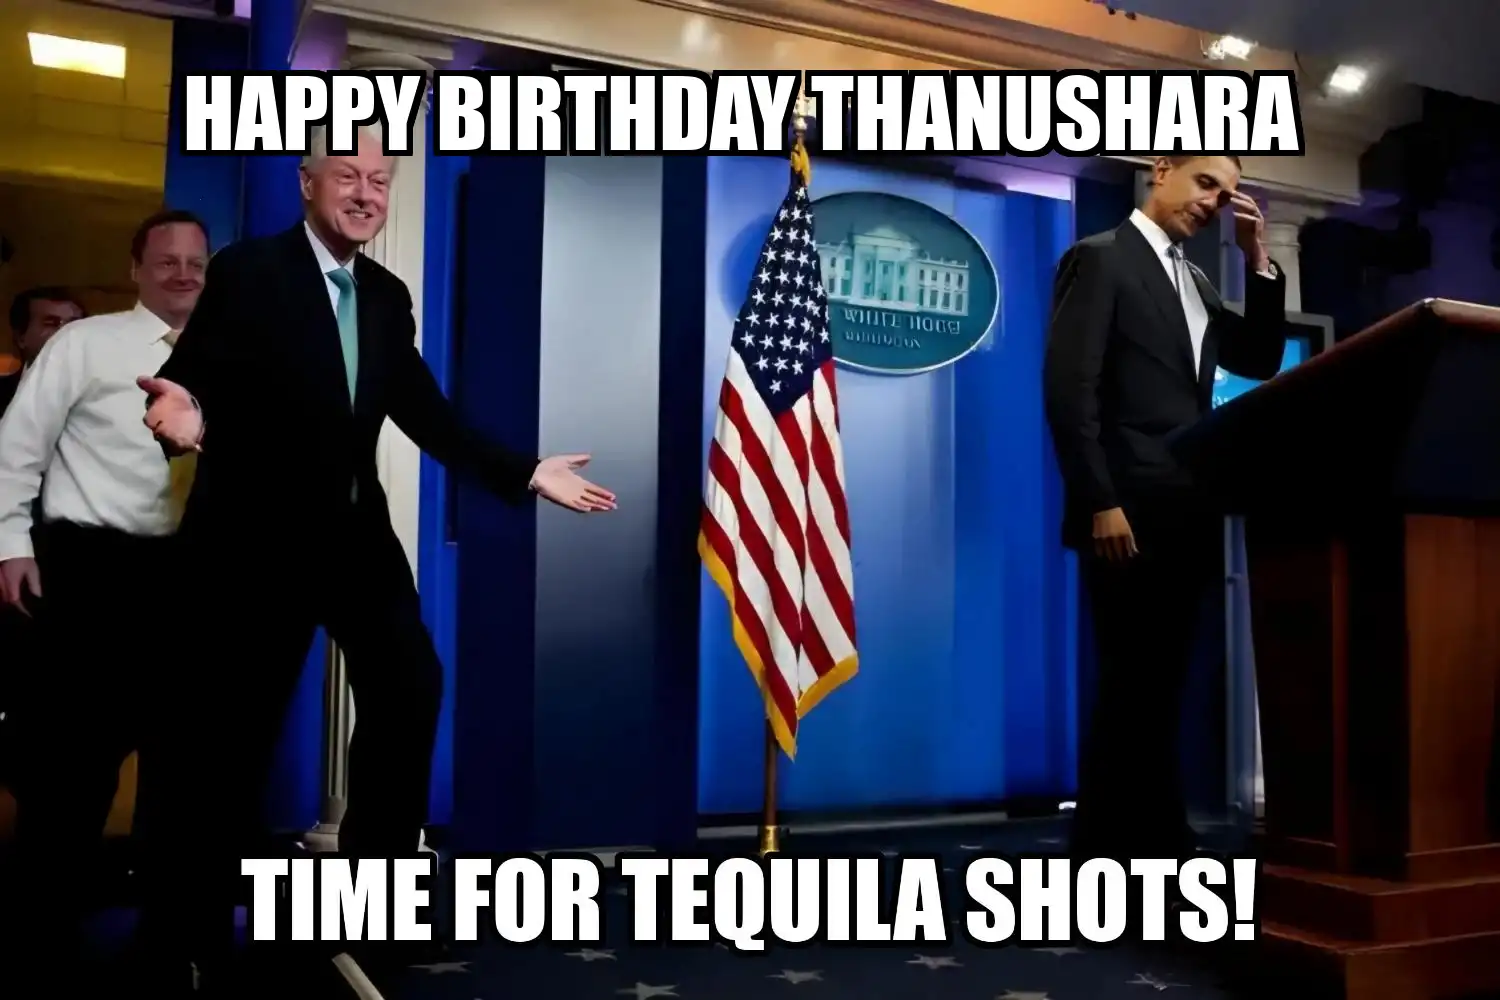 Happy Birthday Thanushara Time For Tequila Shots Memes